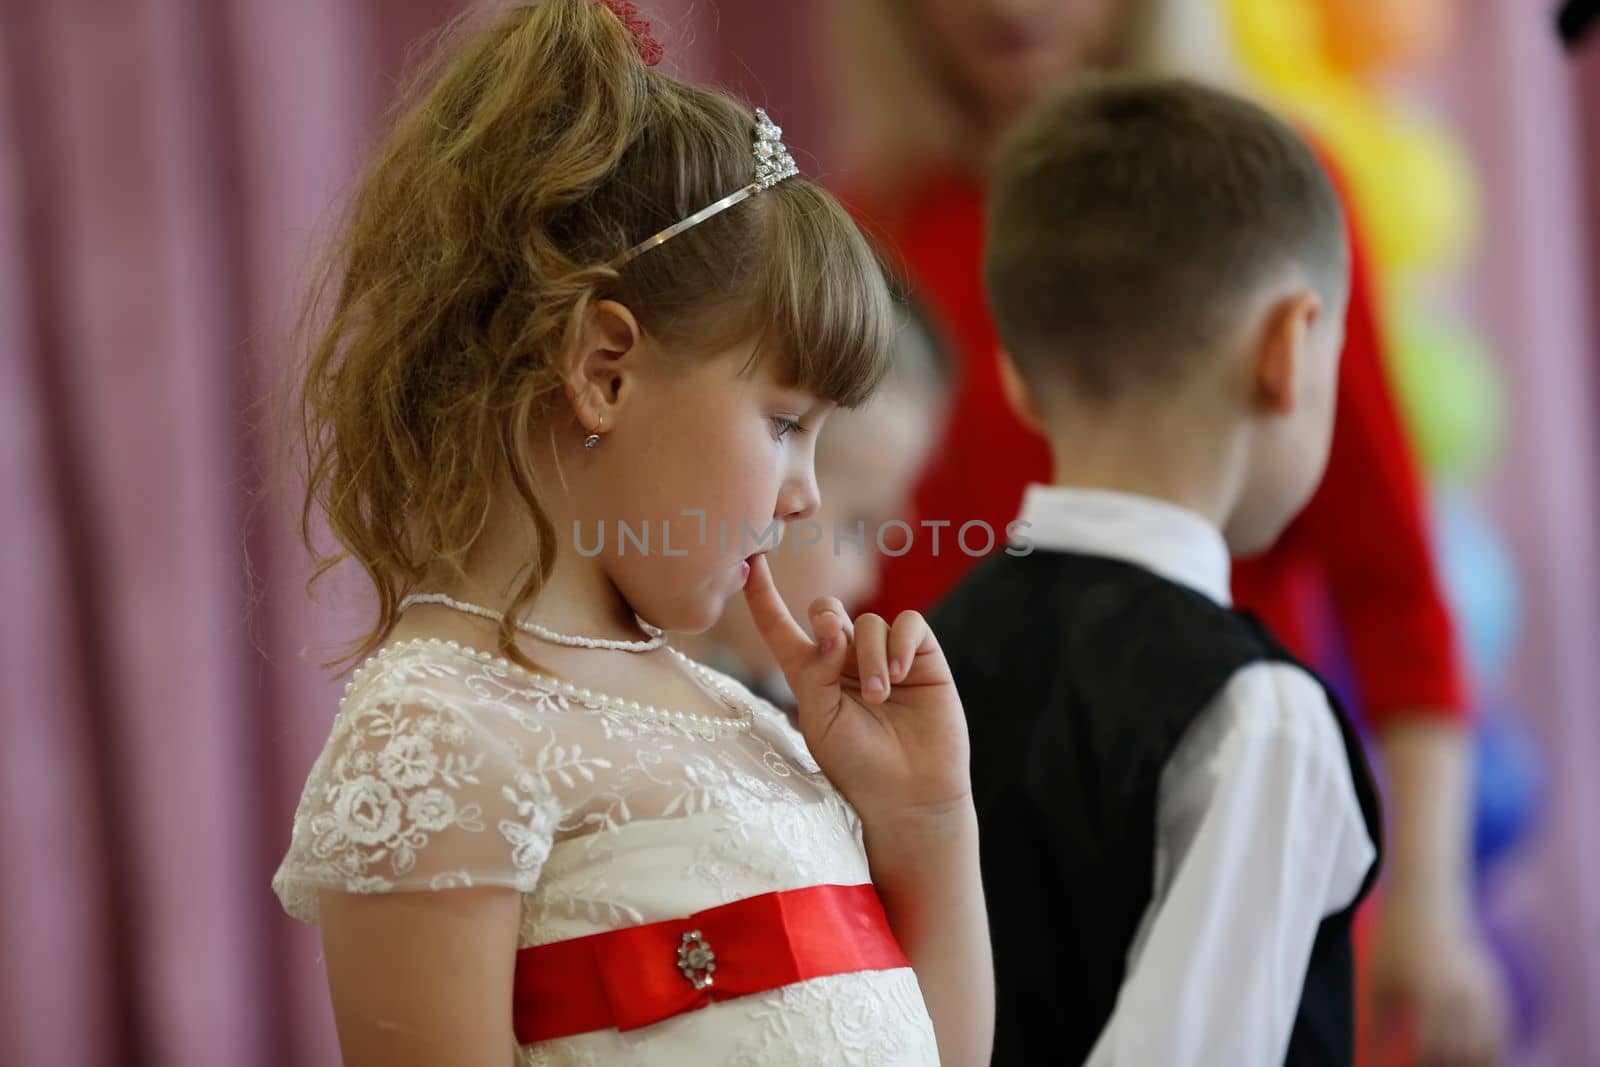 Belarus, Gomil city, May 16, 2019 Matinee in kindergarten.Little girl pensive on the background of a blurred figure of a little boy. Psychology of children's relations.